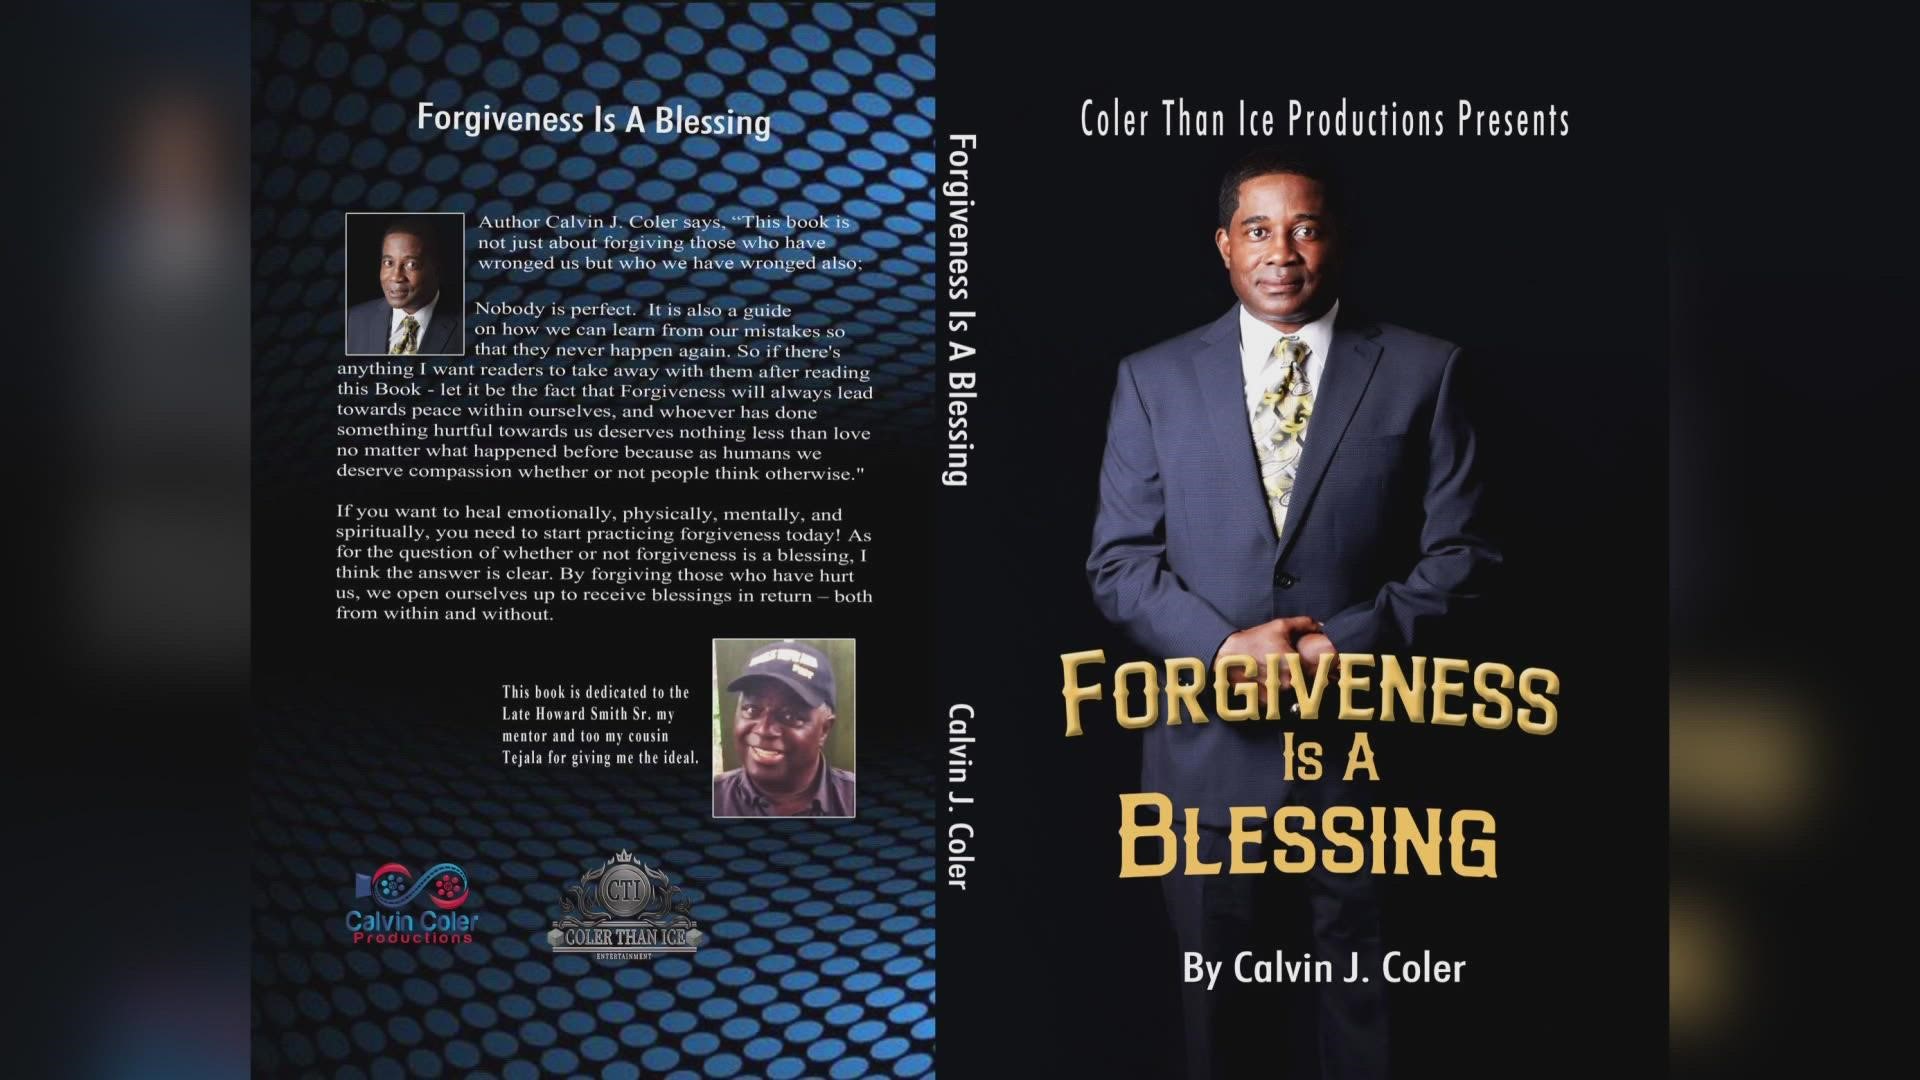 One local veteran is hoping to teach readers how to forgive and heal in his new book.